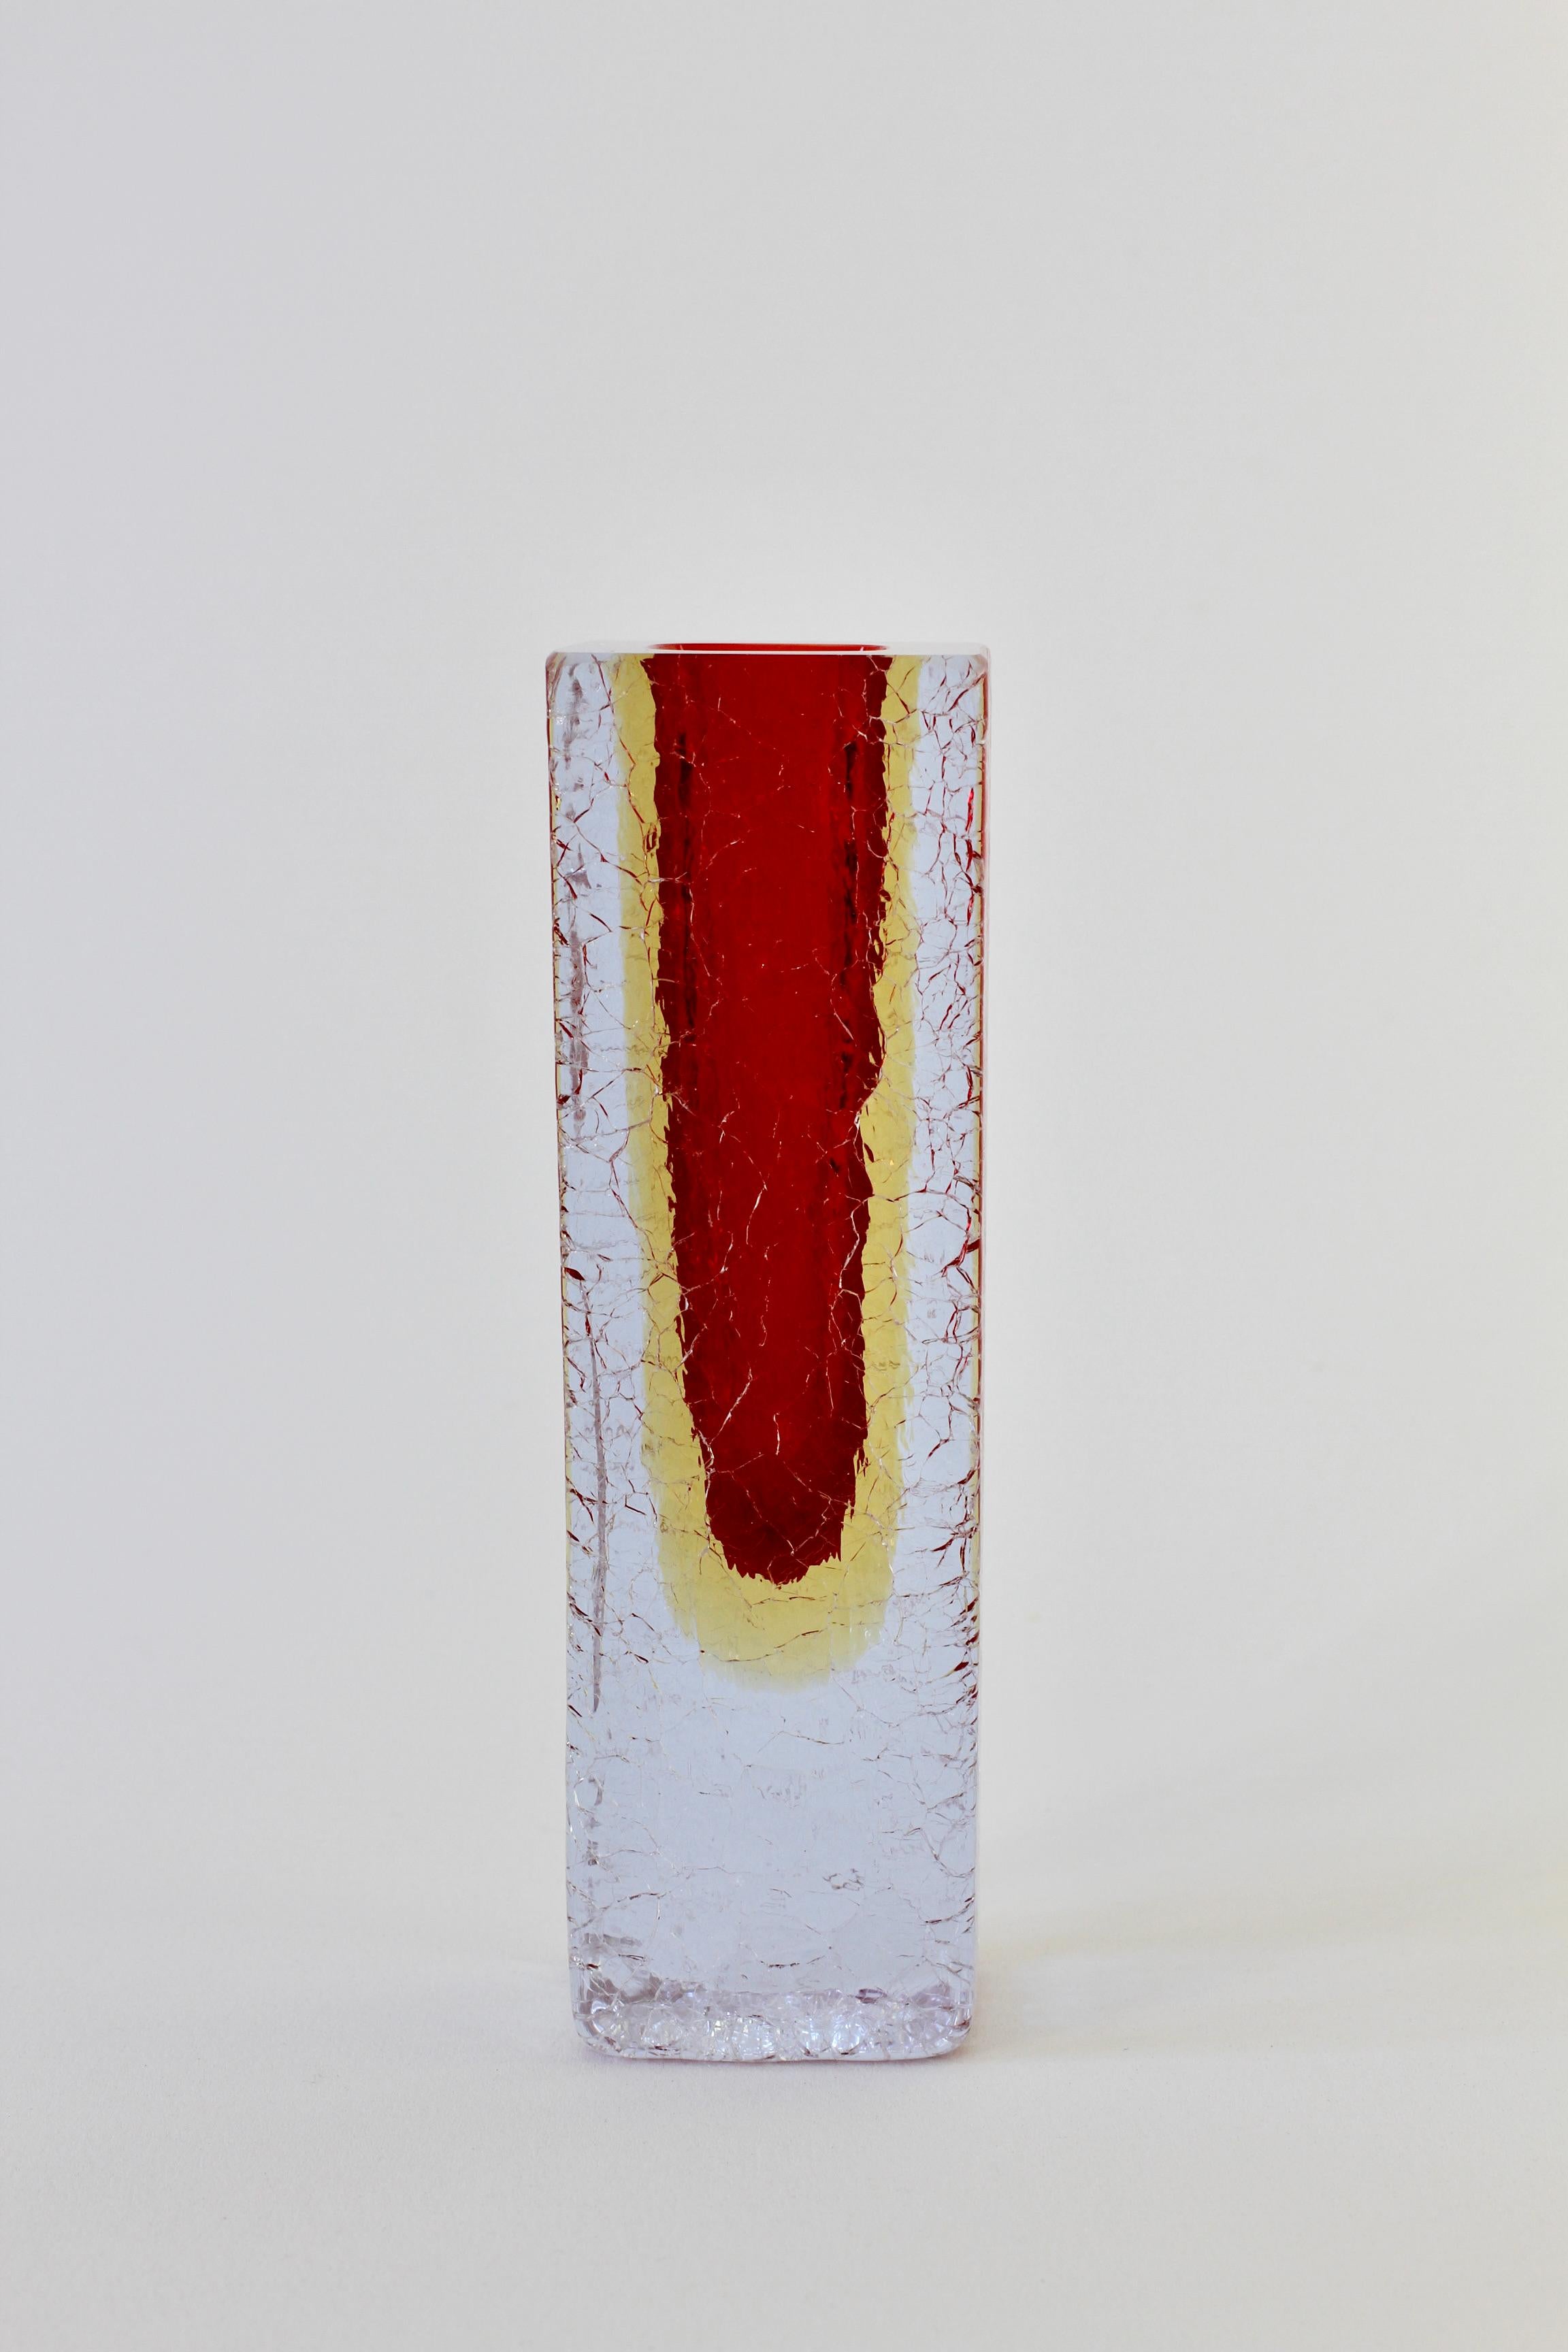 Gorgeous vintage Italian, Venetian faceted Murano glass vase, circa 1960s. A rare and absolutely lovely color combination of ruby red to yellow to light lilac/clear 'Sommerso' or 'Submerged' glass. These are often attributed to Flavio Poli for